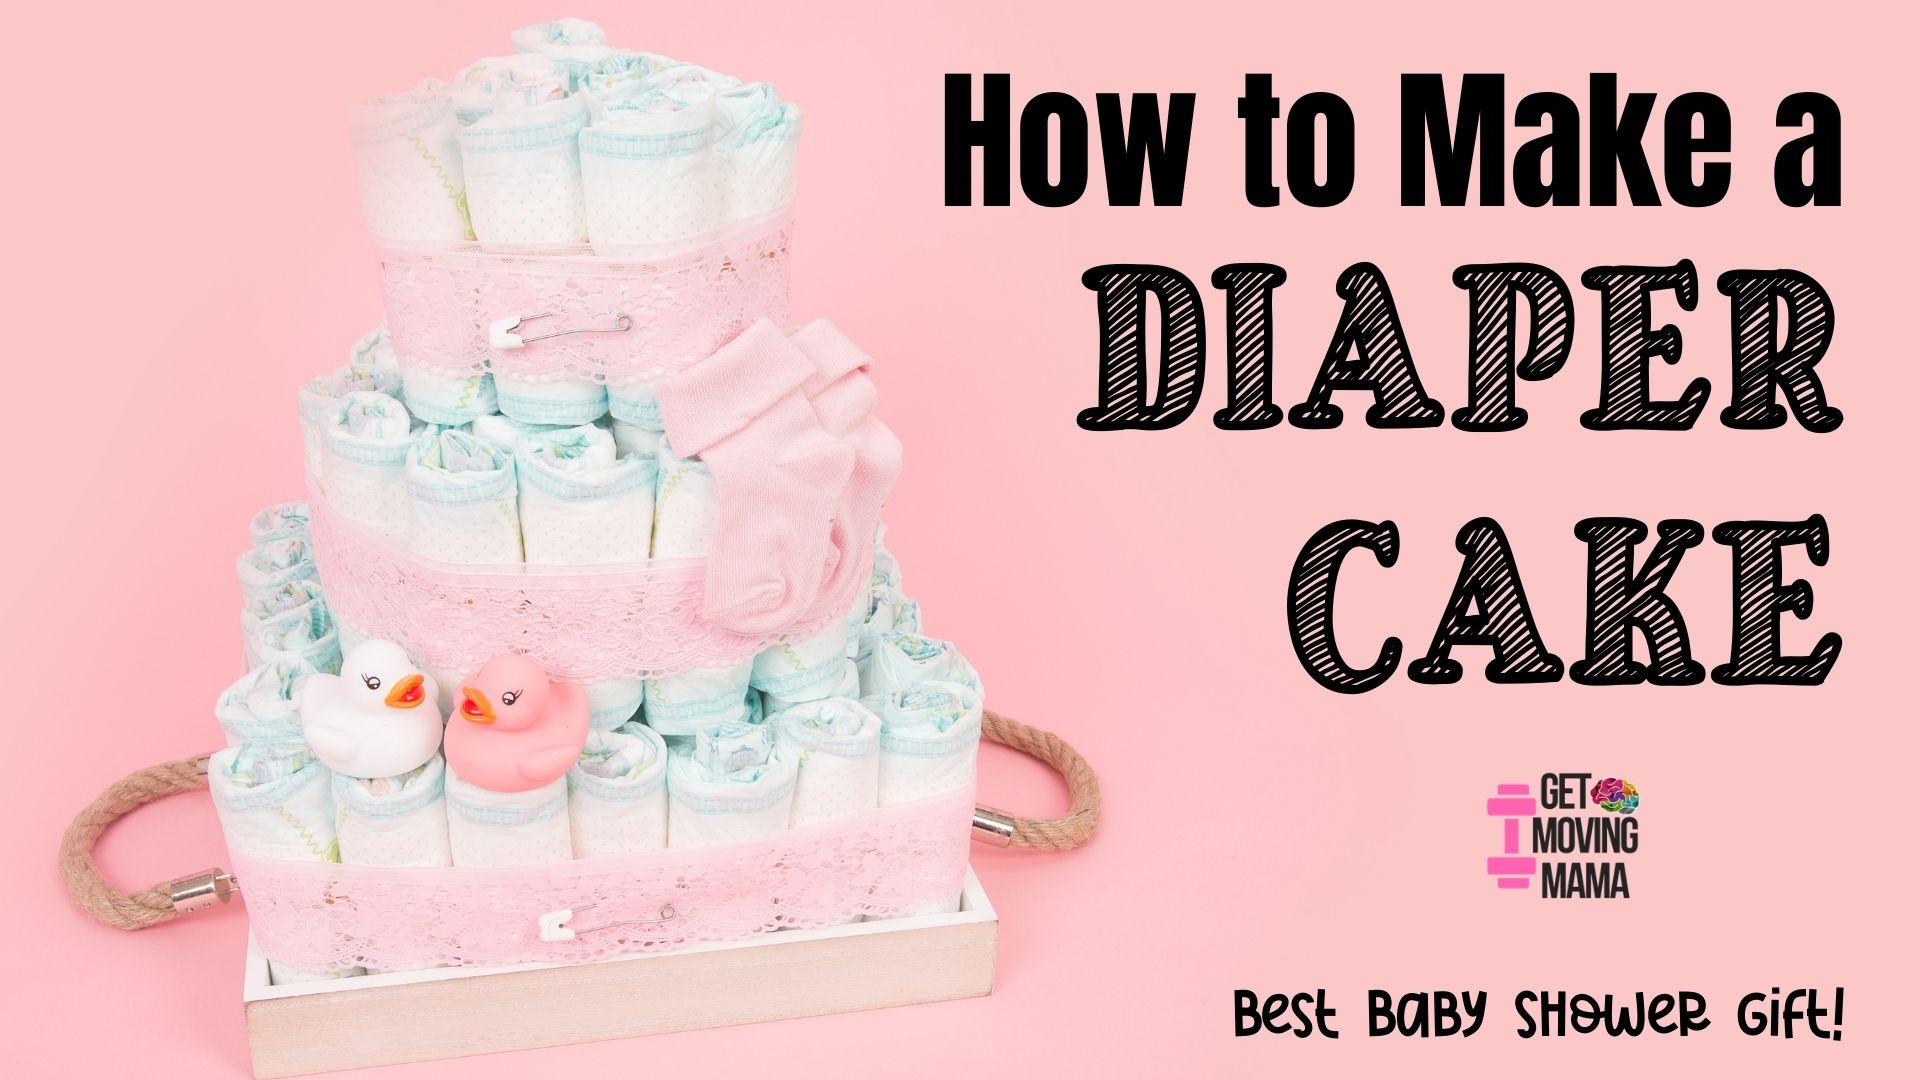 A picture of a diaper cake with pink socks on a light pink background with "How to Make a Diaper Cake" in black font.